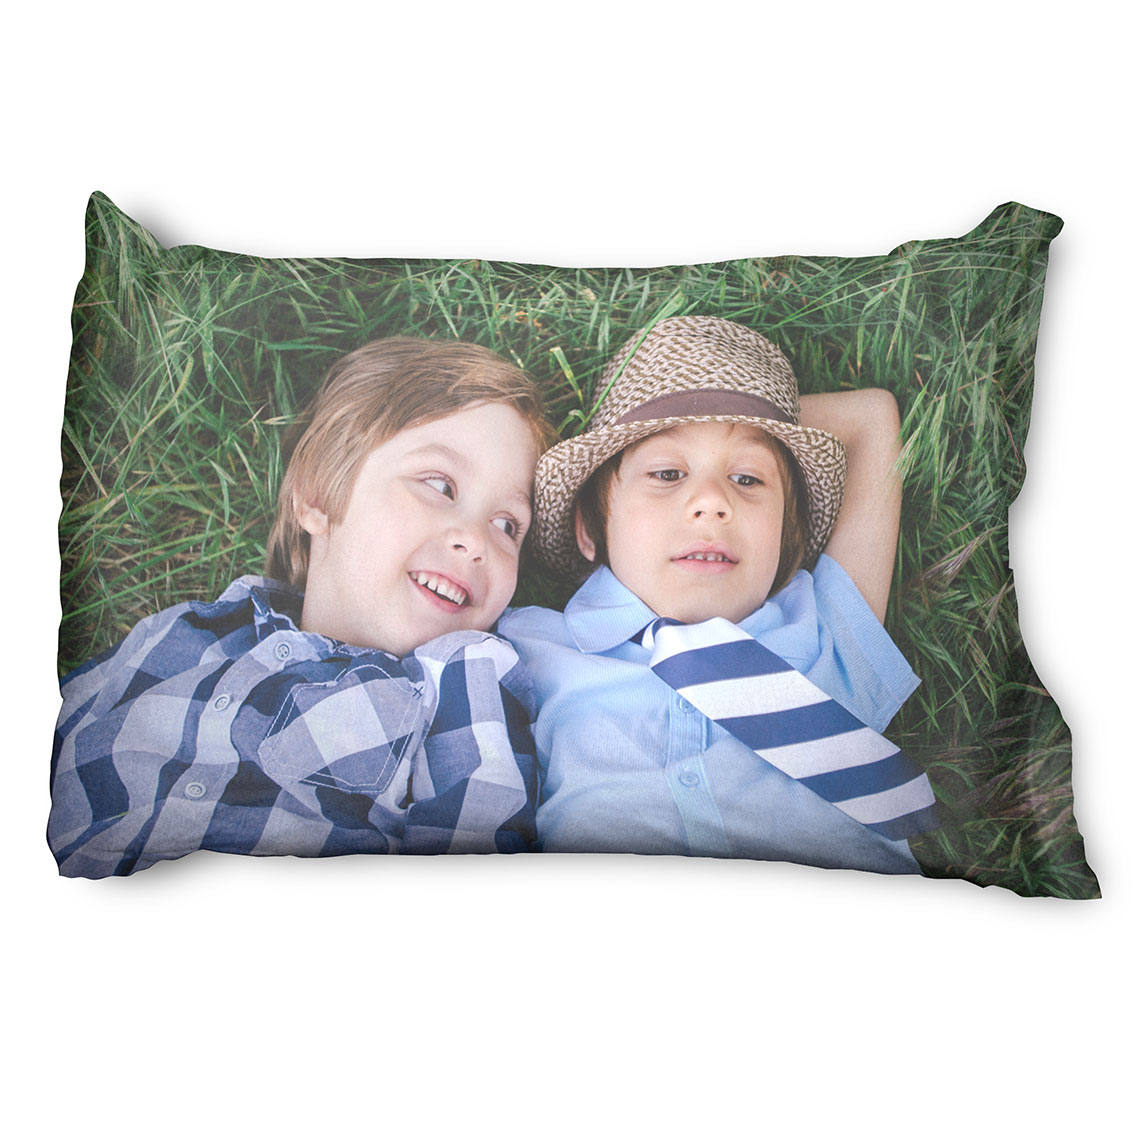 Customized Personalised Custom Printed Pillow Cushion Your Foto Mix Collection 